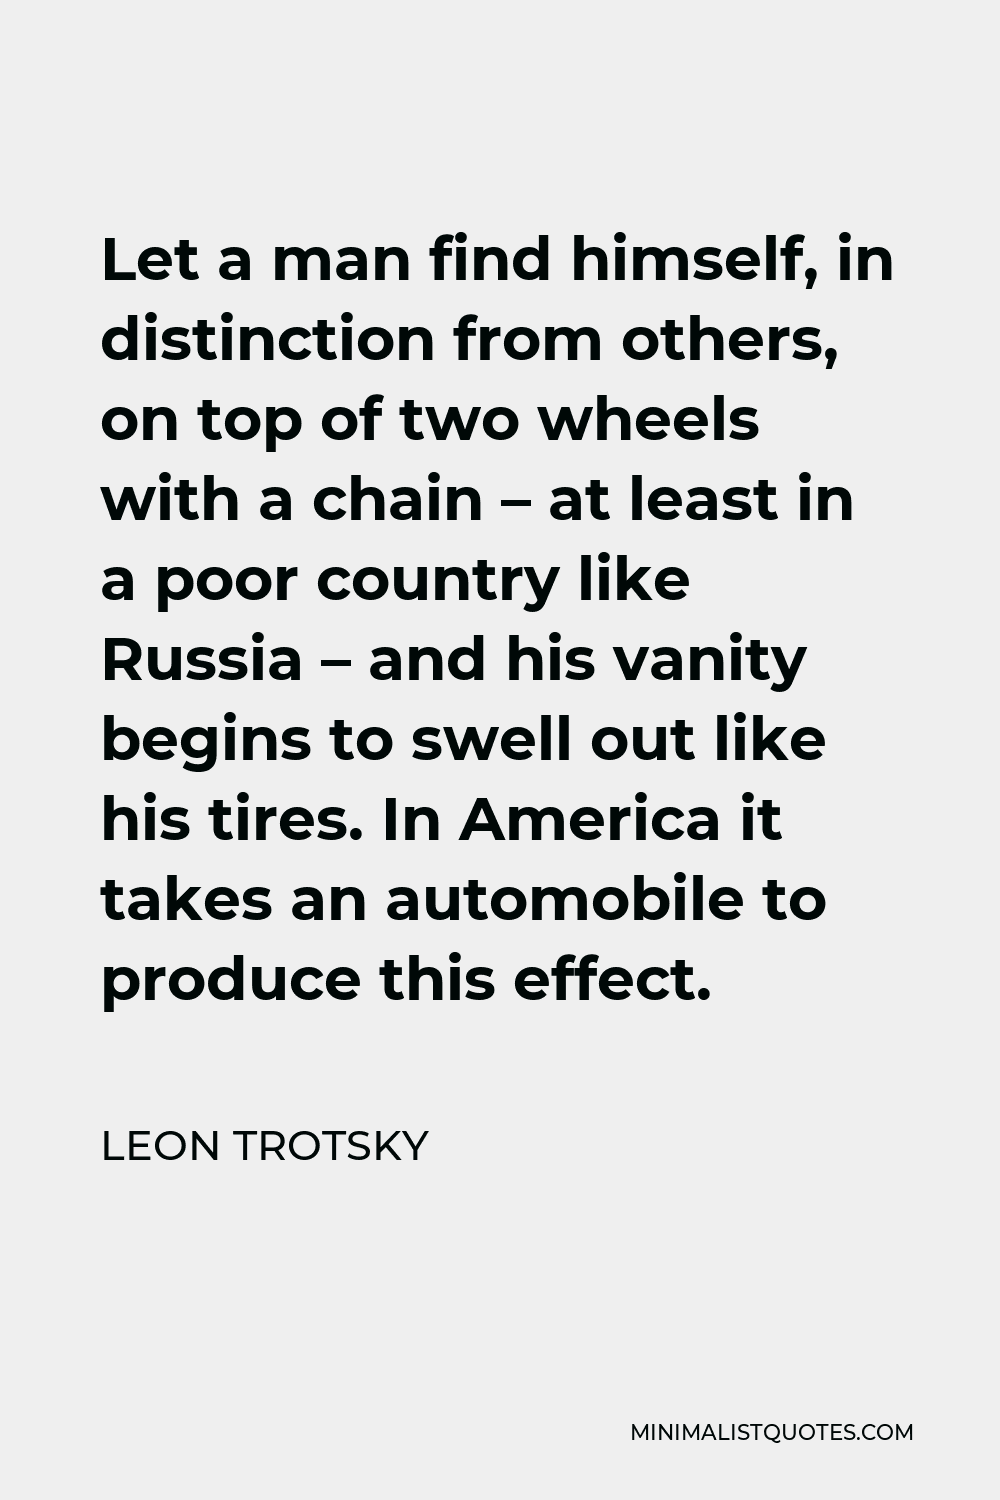 Leon Trotsky Quote - Let a man find himself, in distinction from others, on top of two wheels with a chain – at least in a poor country like Russia – and his vanity begins to swell out like his tires. In America it takes an automobile to produce this effect.